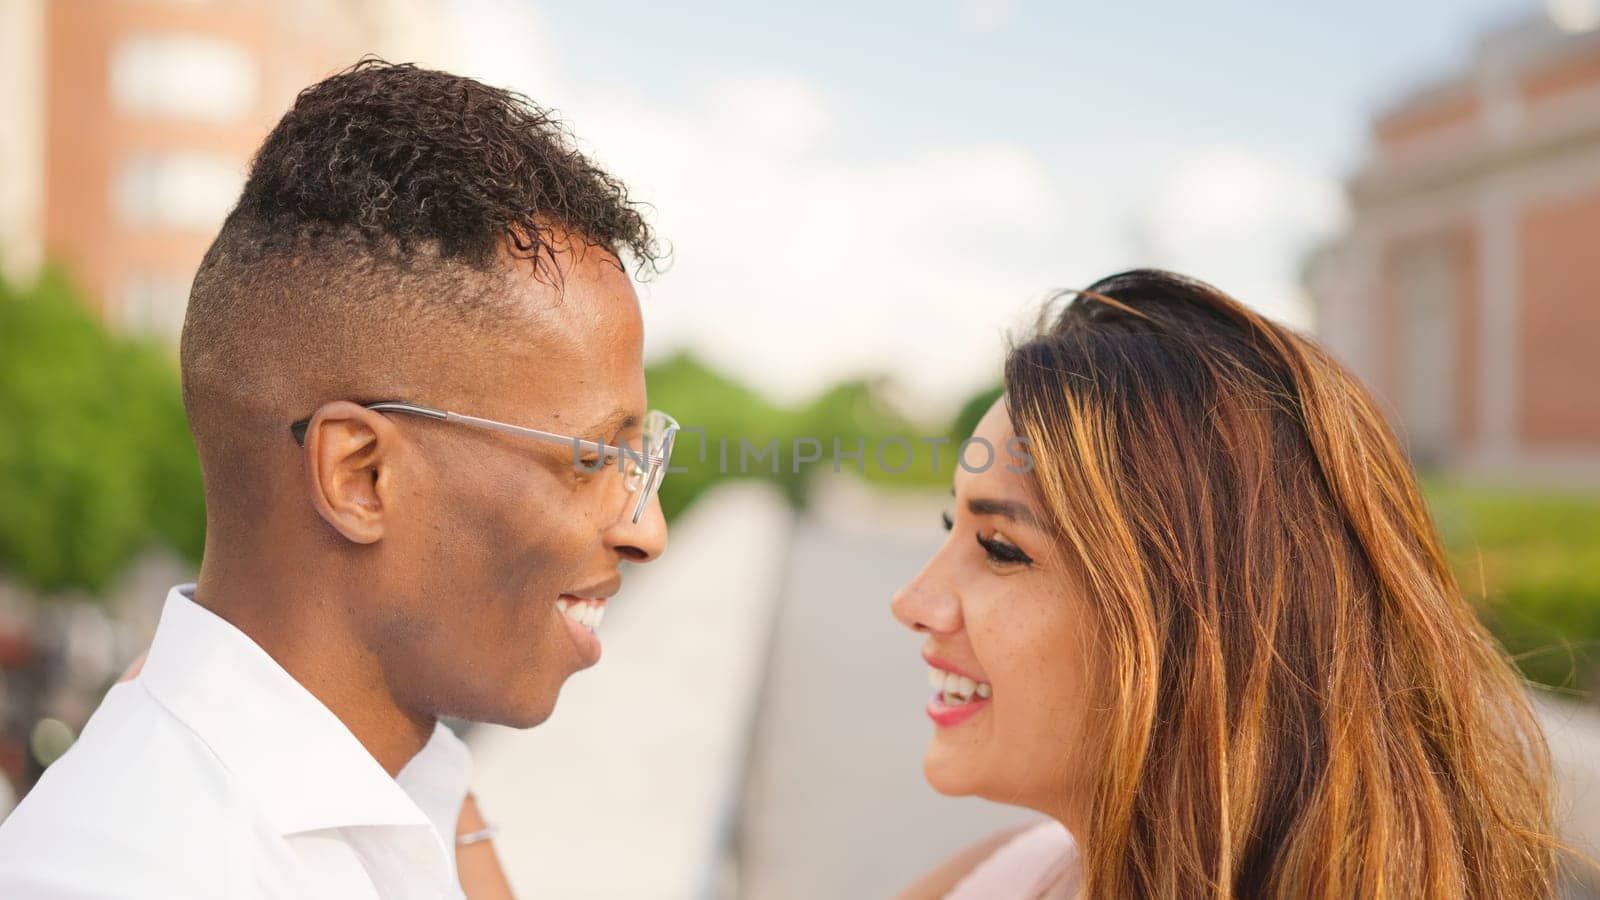 Multiethnic couple looking at each other smiling by ivanmoreno